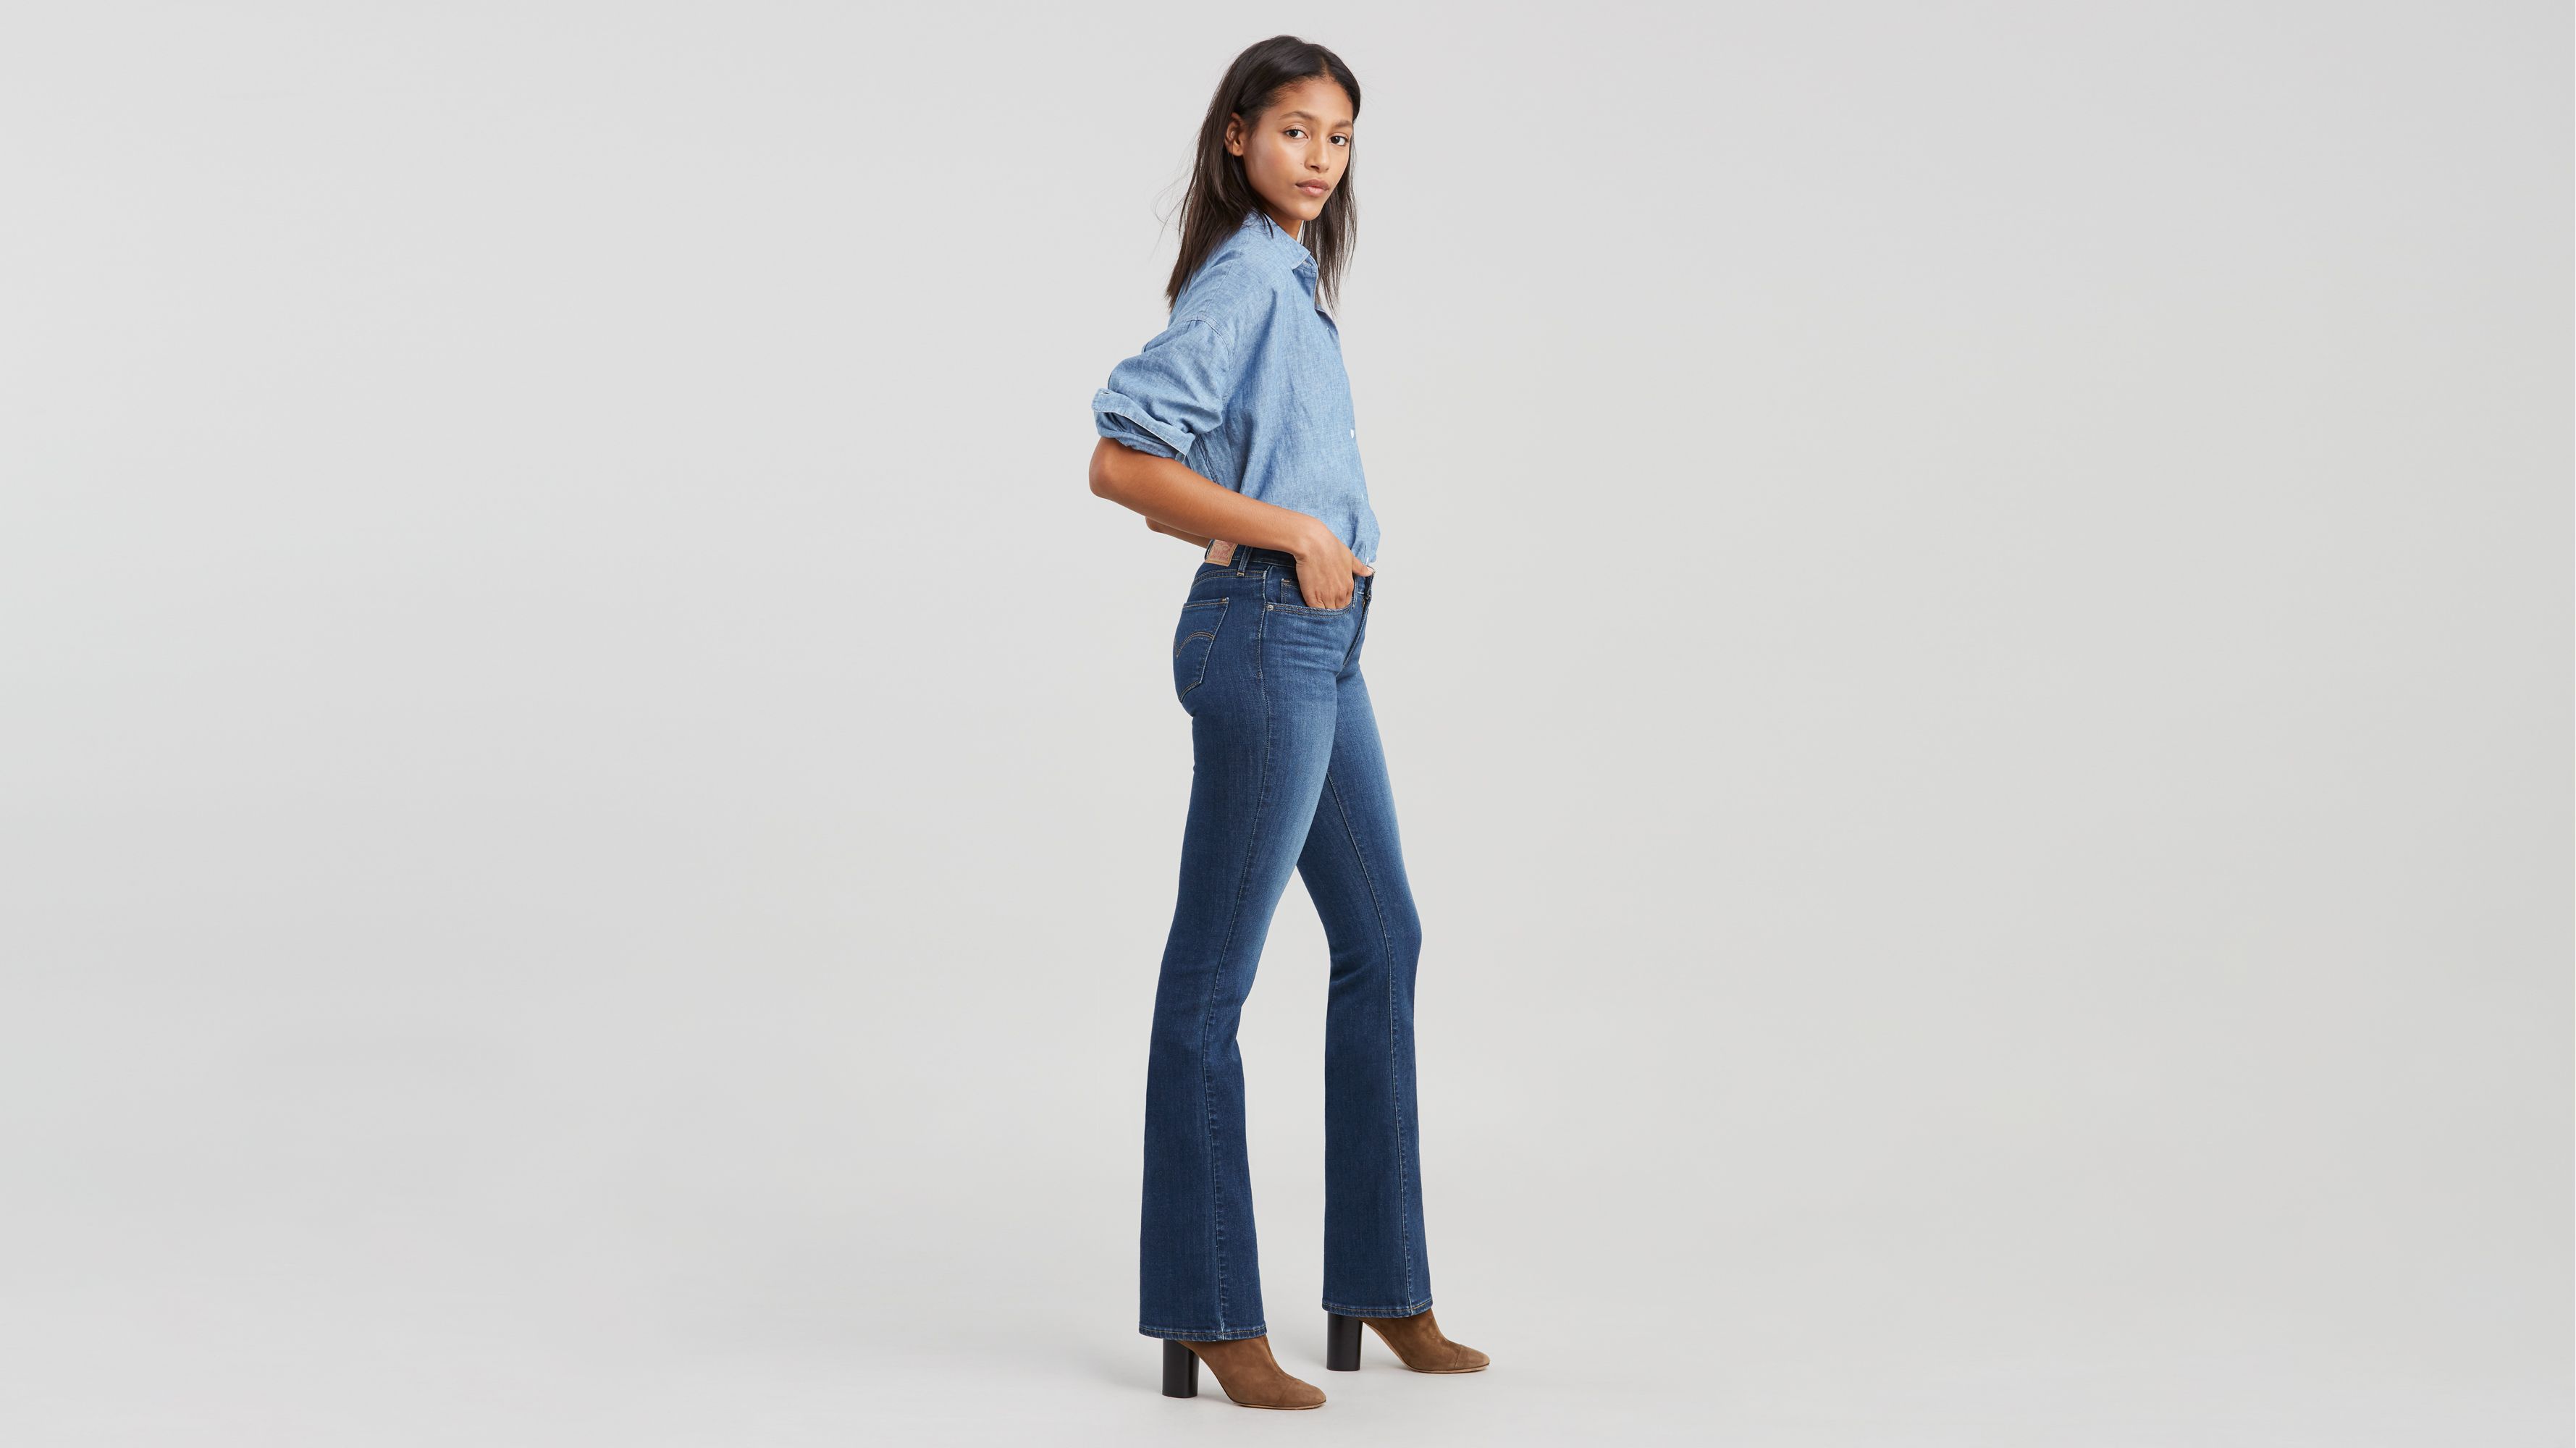 levi's 512 bootcut jeans womens